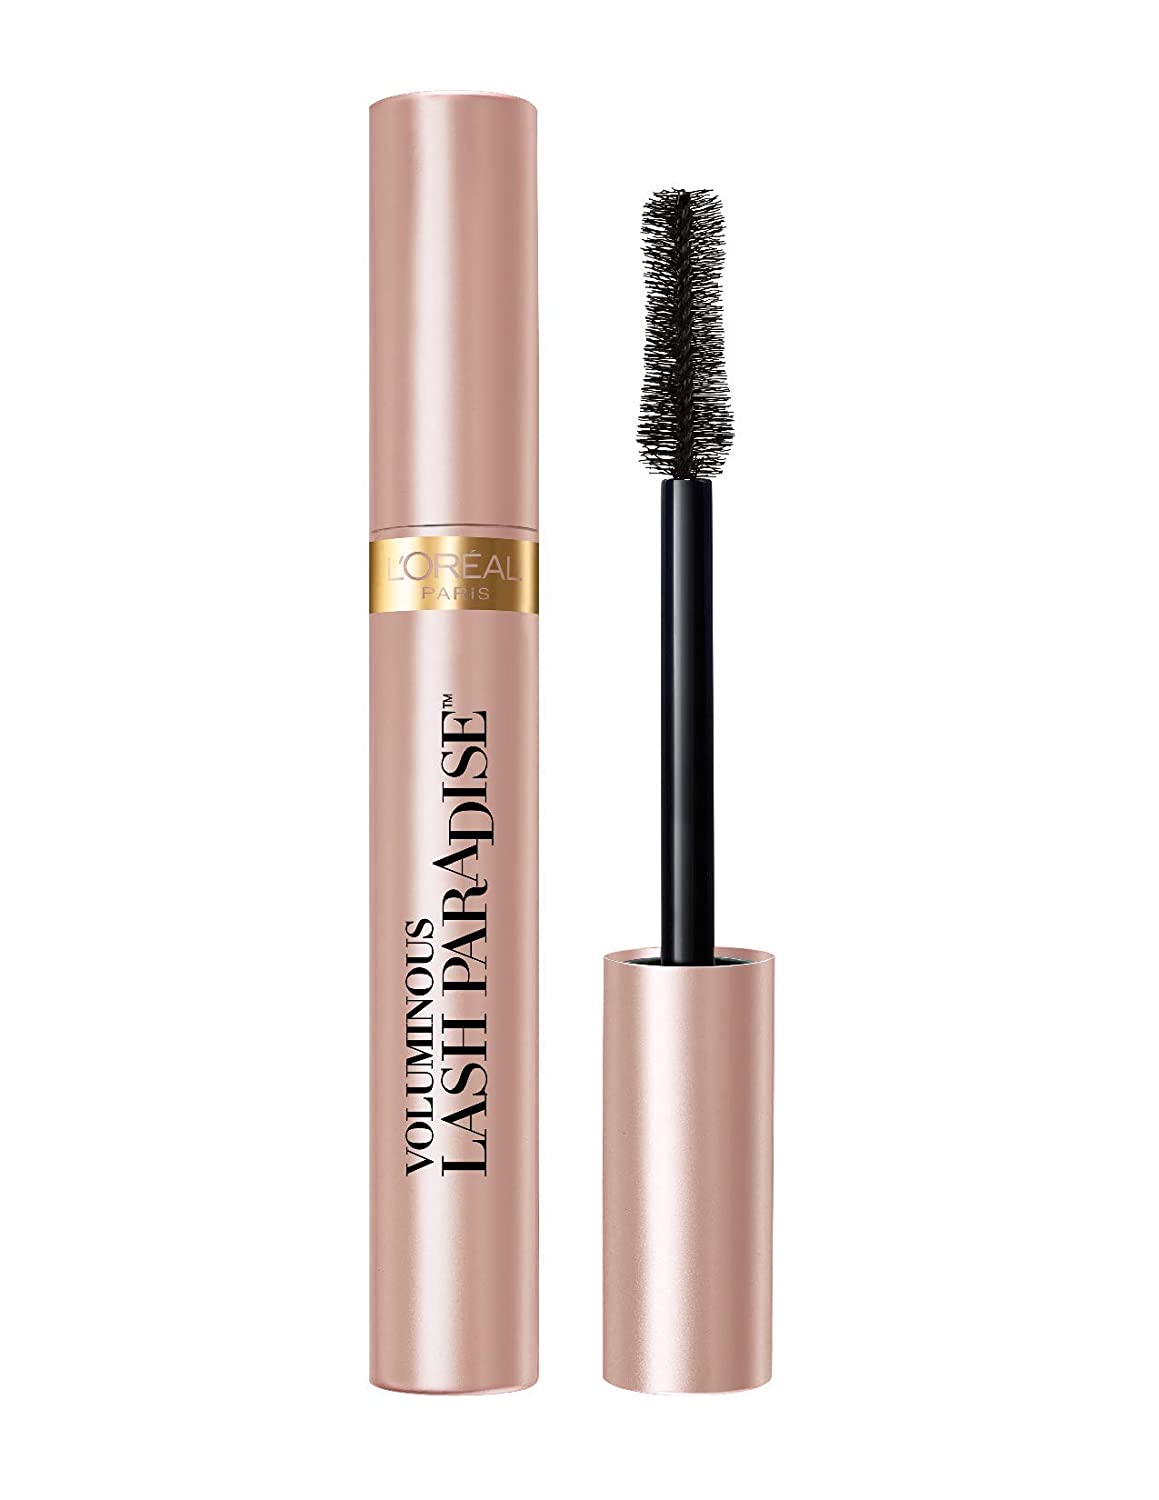 The best type mascara of 2020 every girl needs